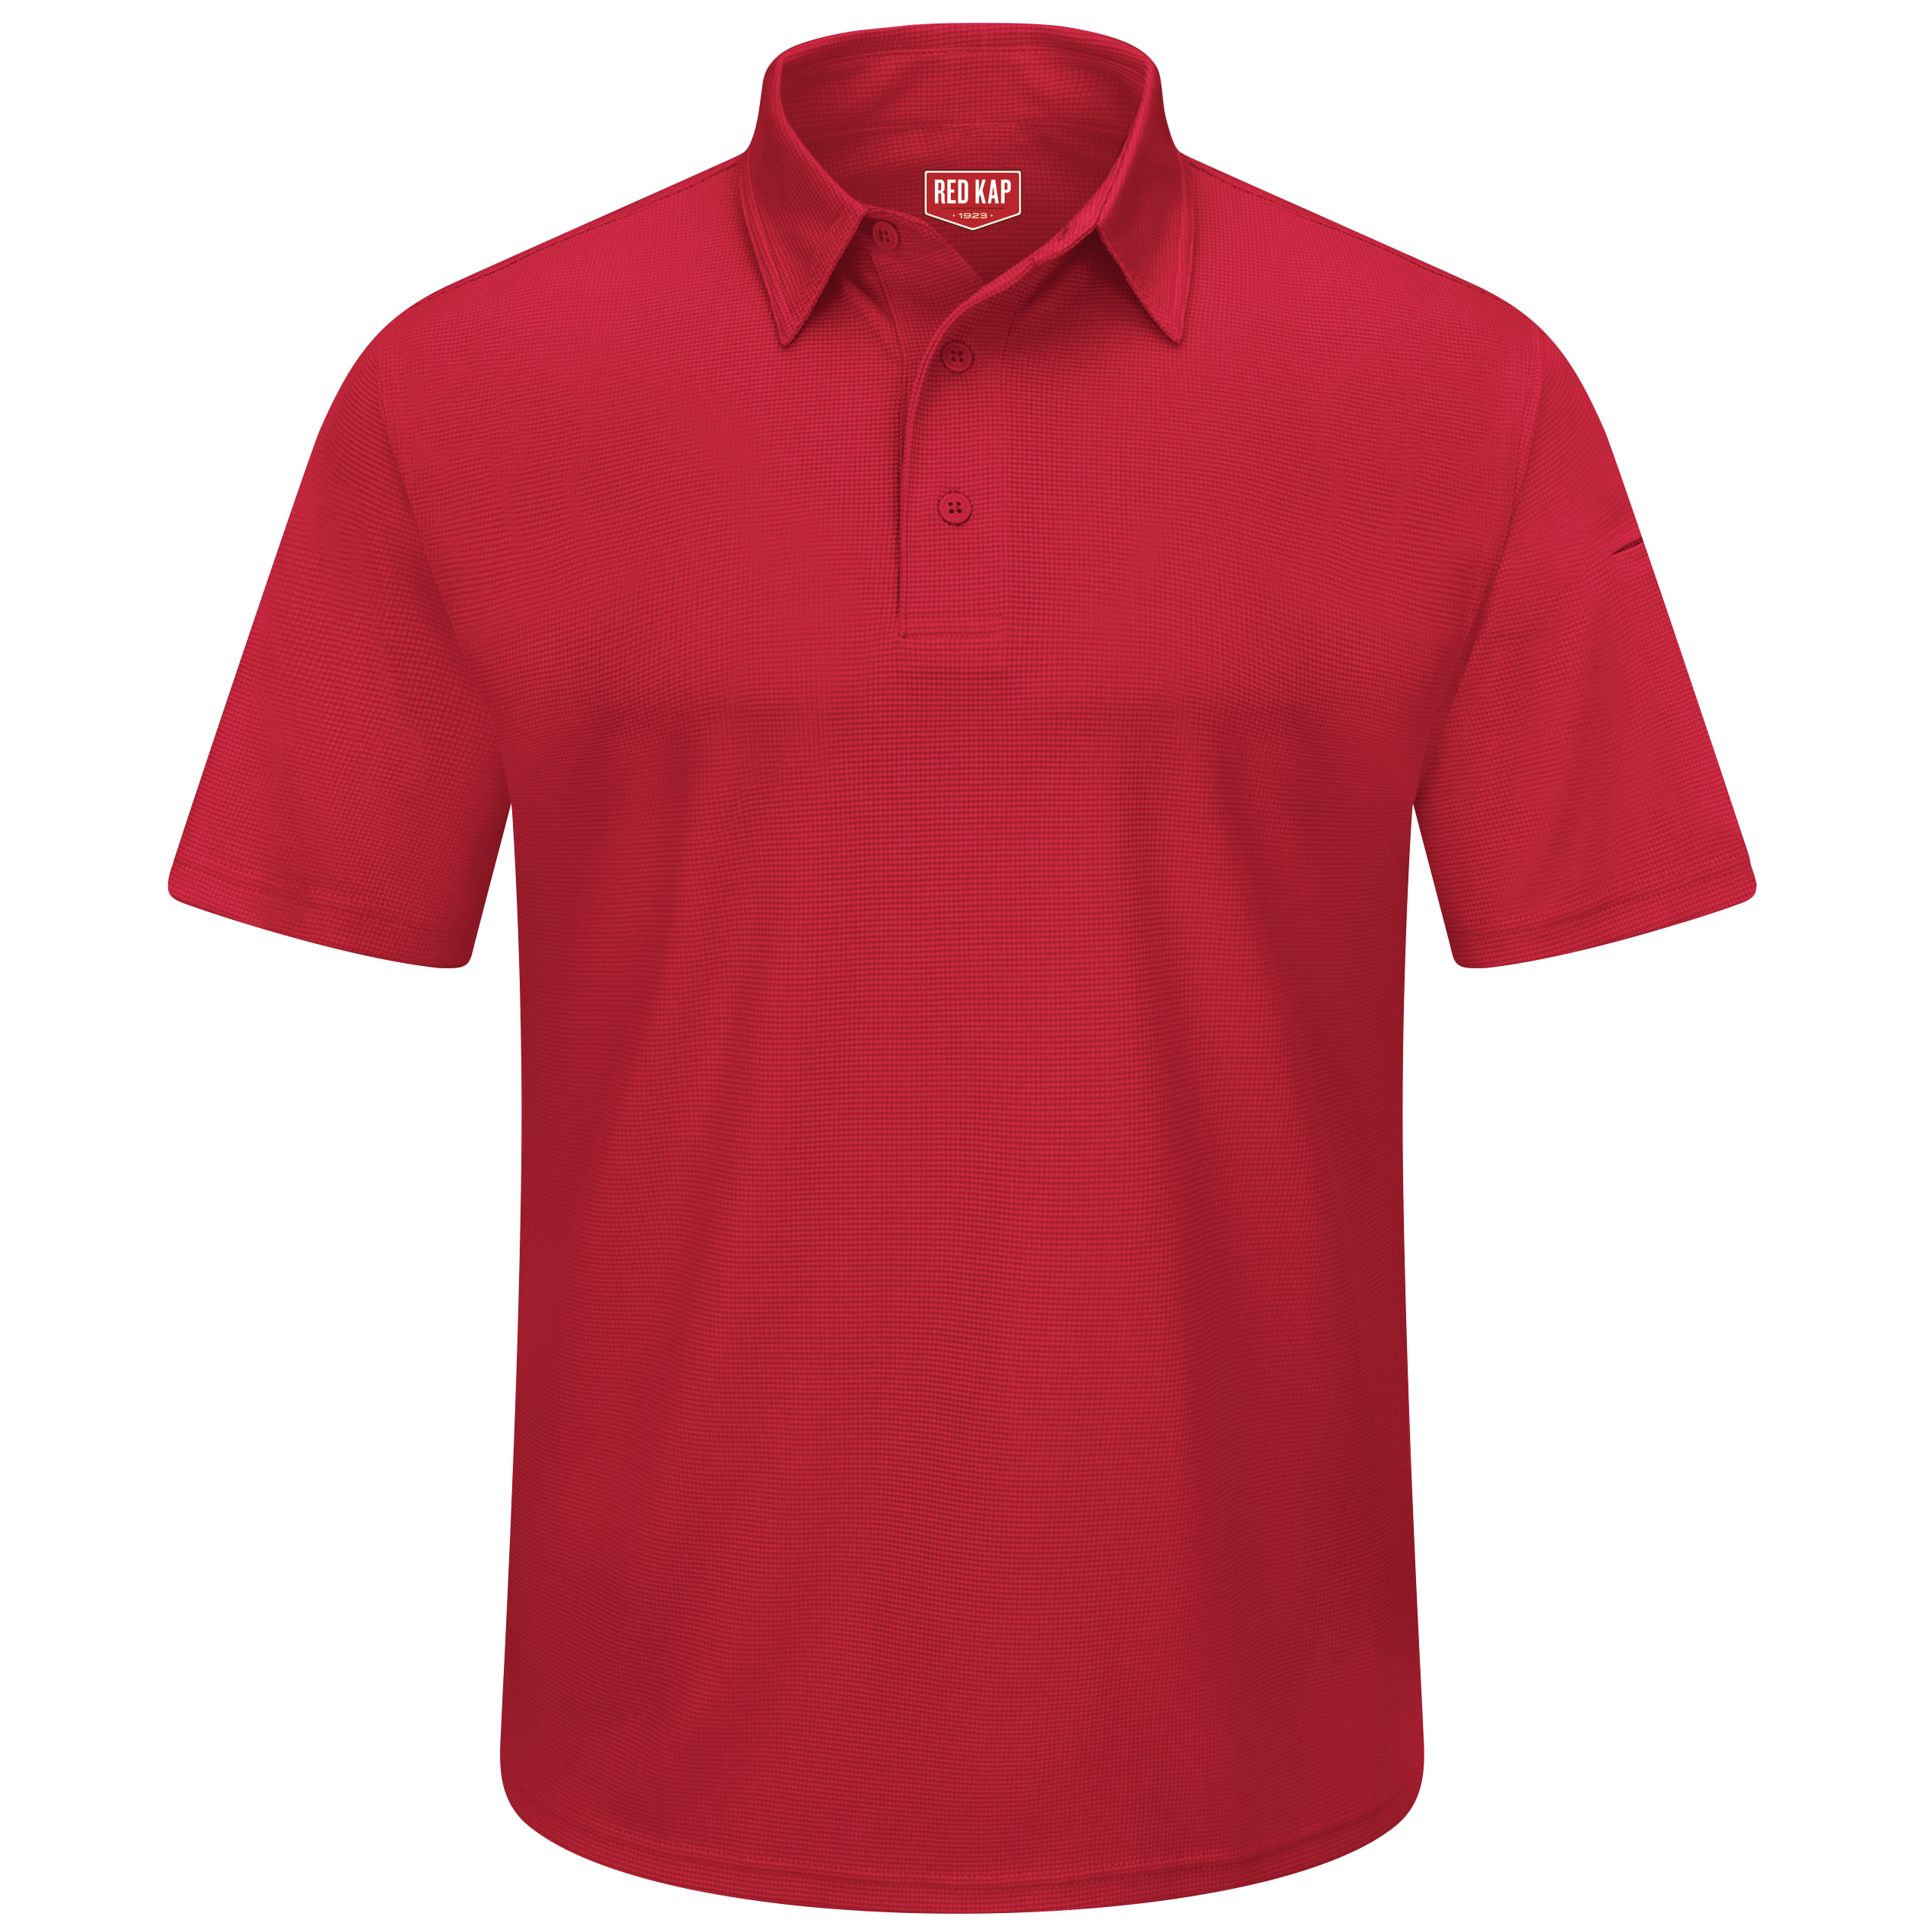 Picture of Red Kap® SK90 Men's Short Sleeve Performance Knit® Flex Series Pro Polo